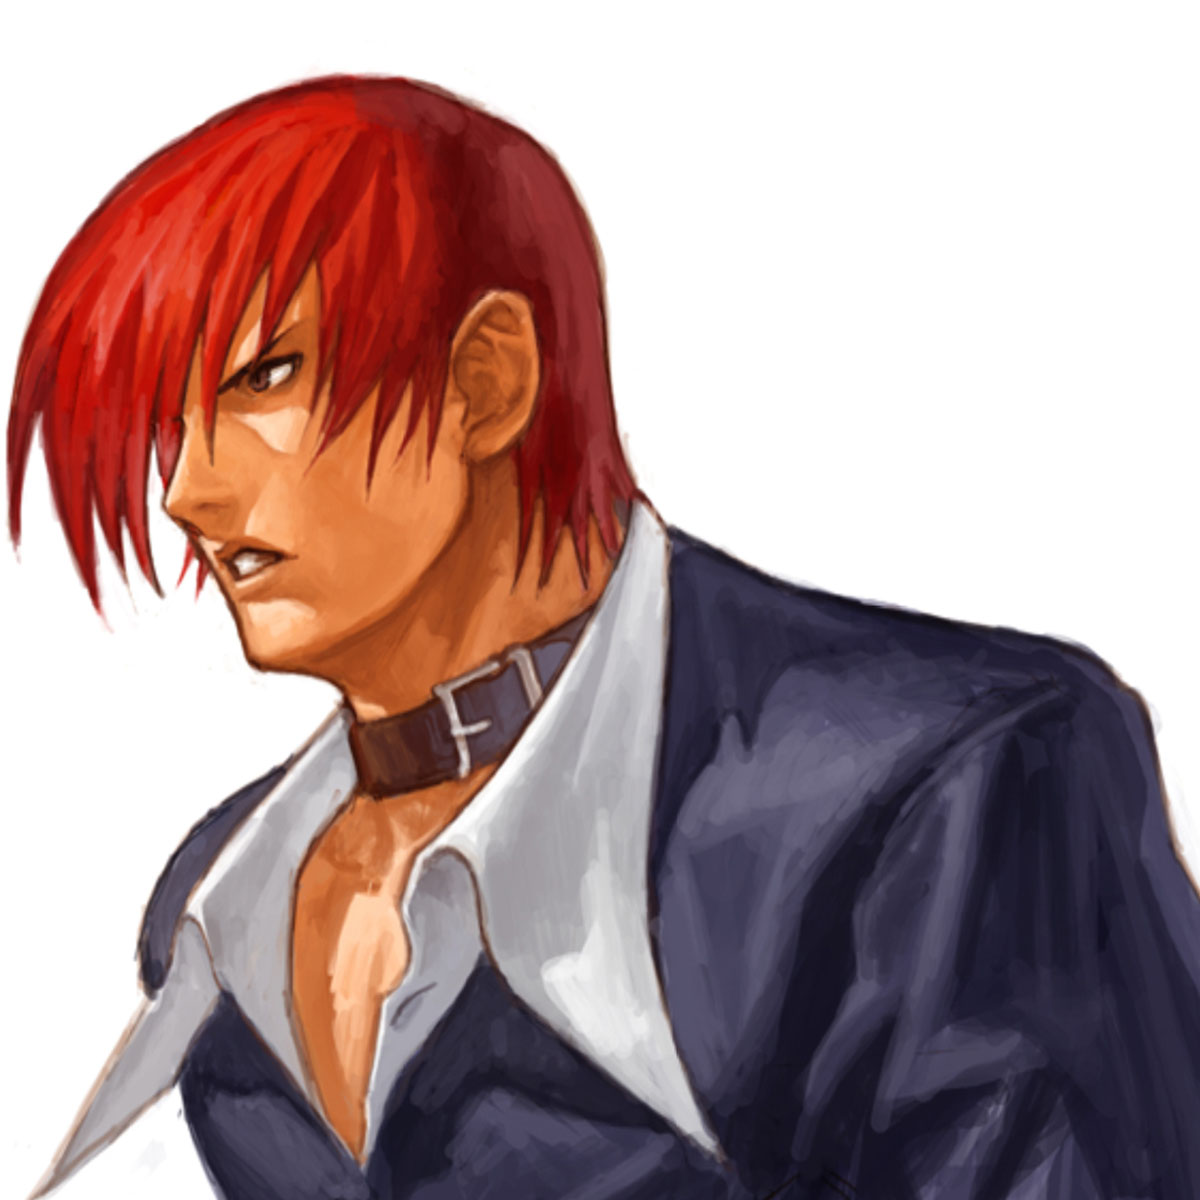 Orochi Iori from The King of Fighters - Game Art Gallery